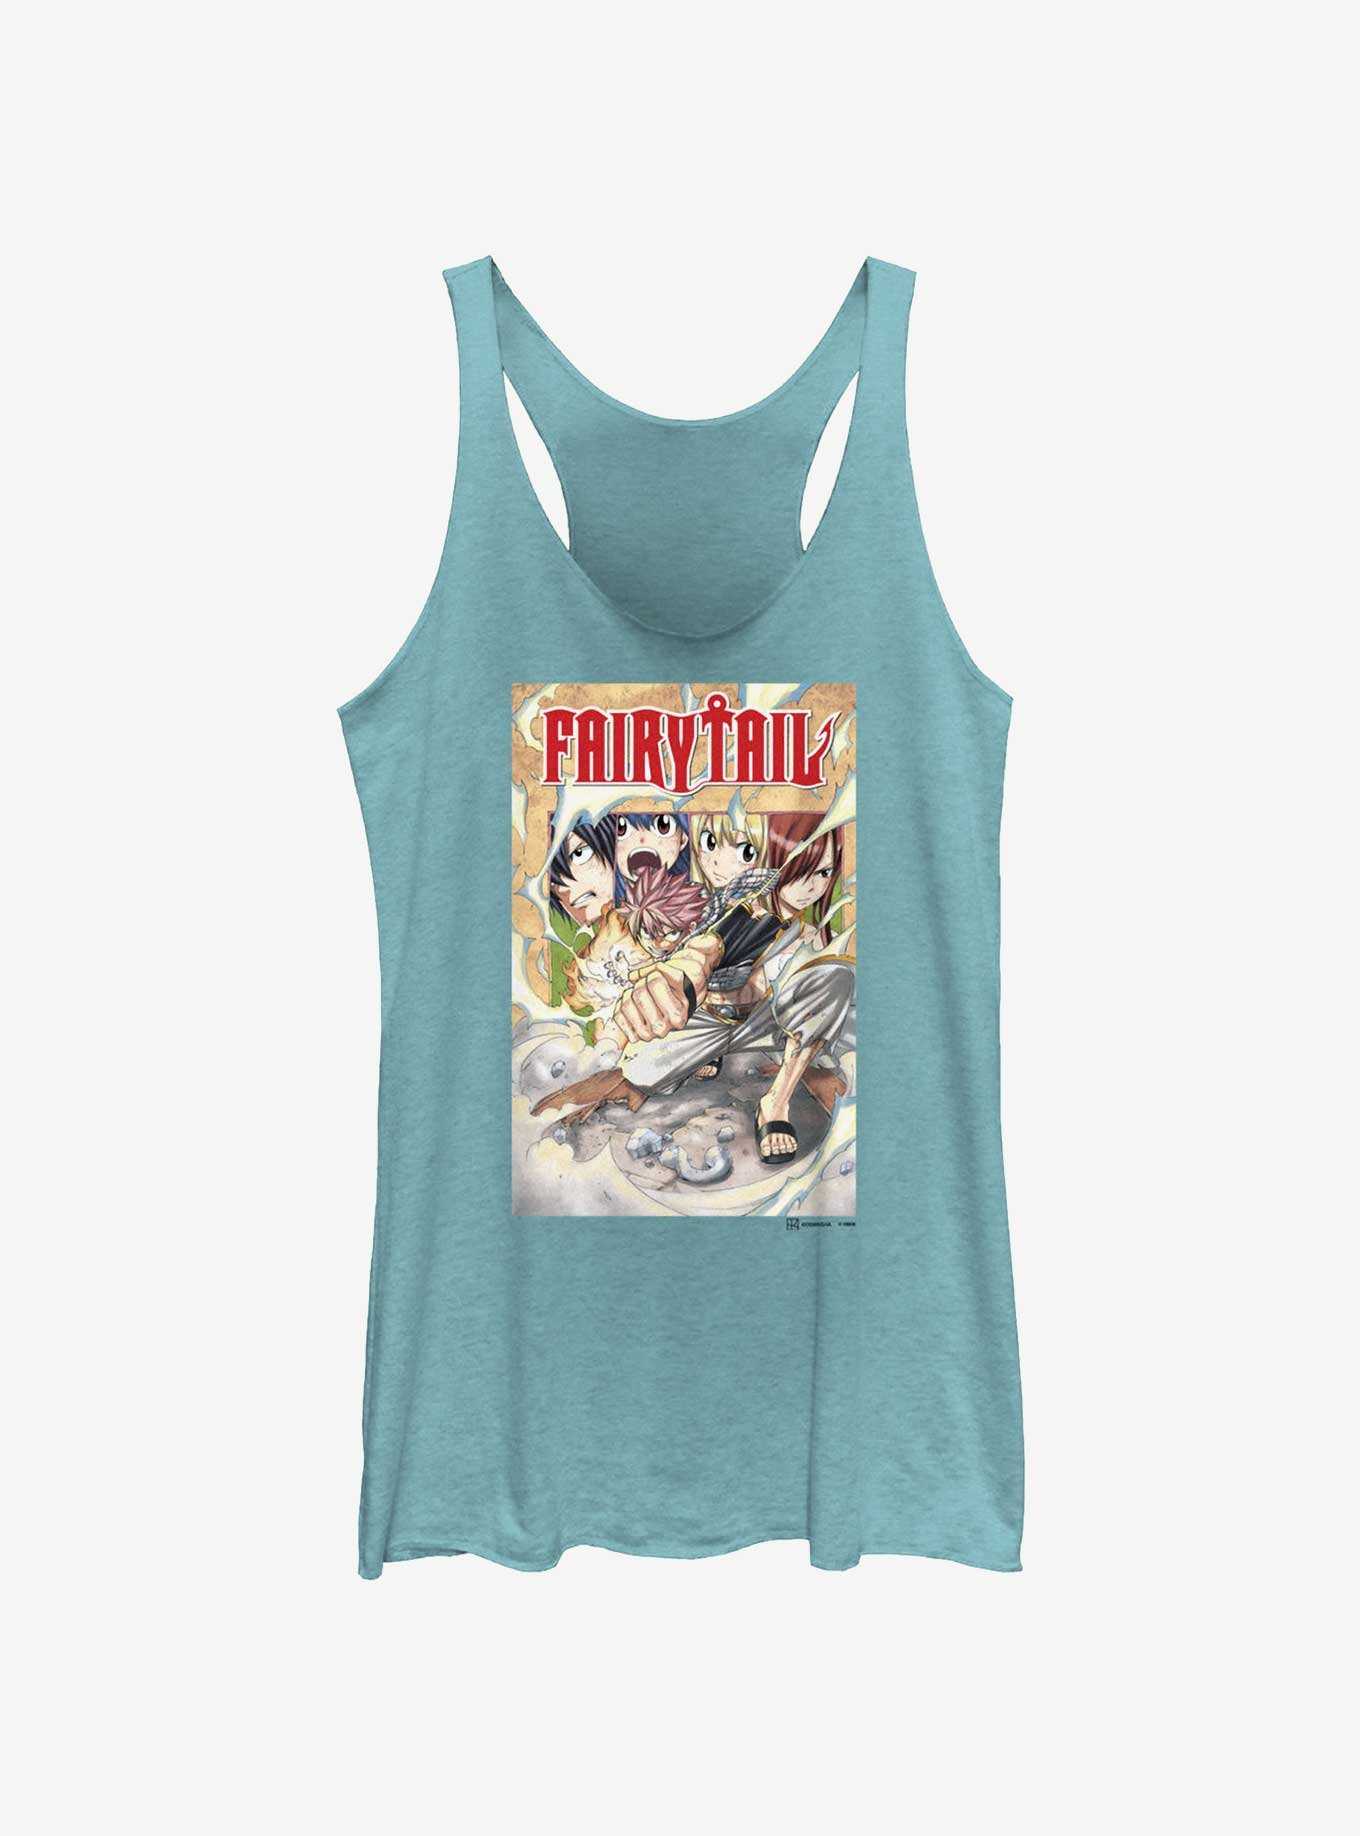 Fairy Tail Cover 3 Girls Tank, , hi-res